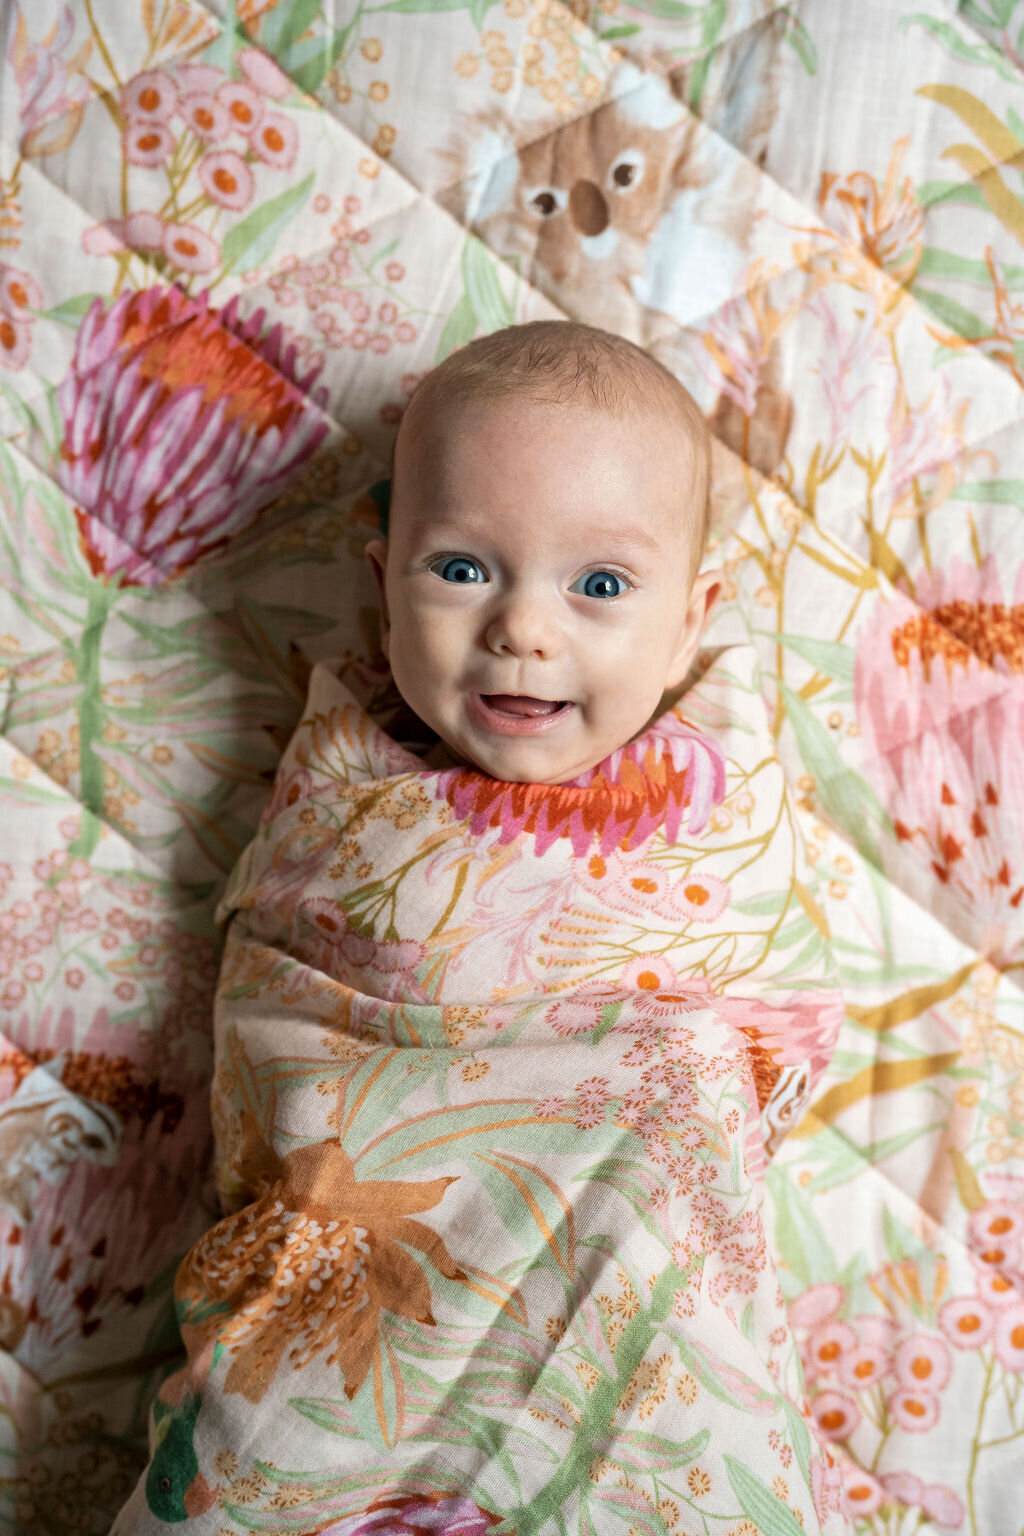 Newborn baby girl swaddled and smiling at the camera during an at home photo shoot